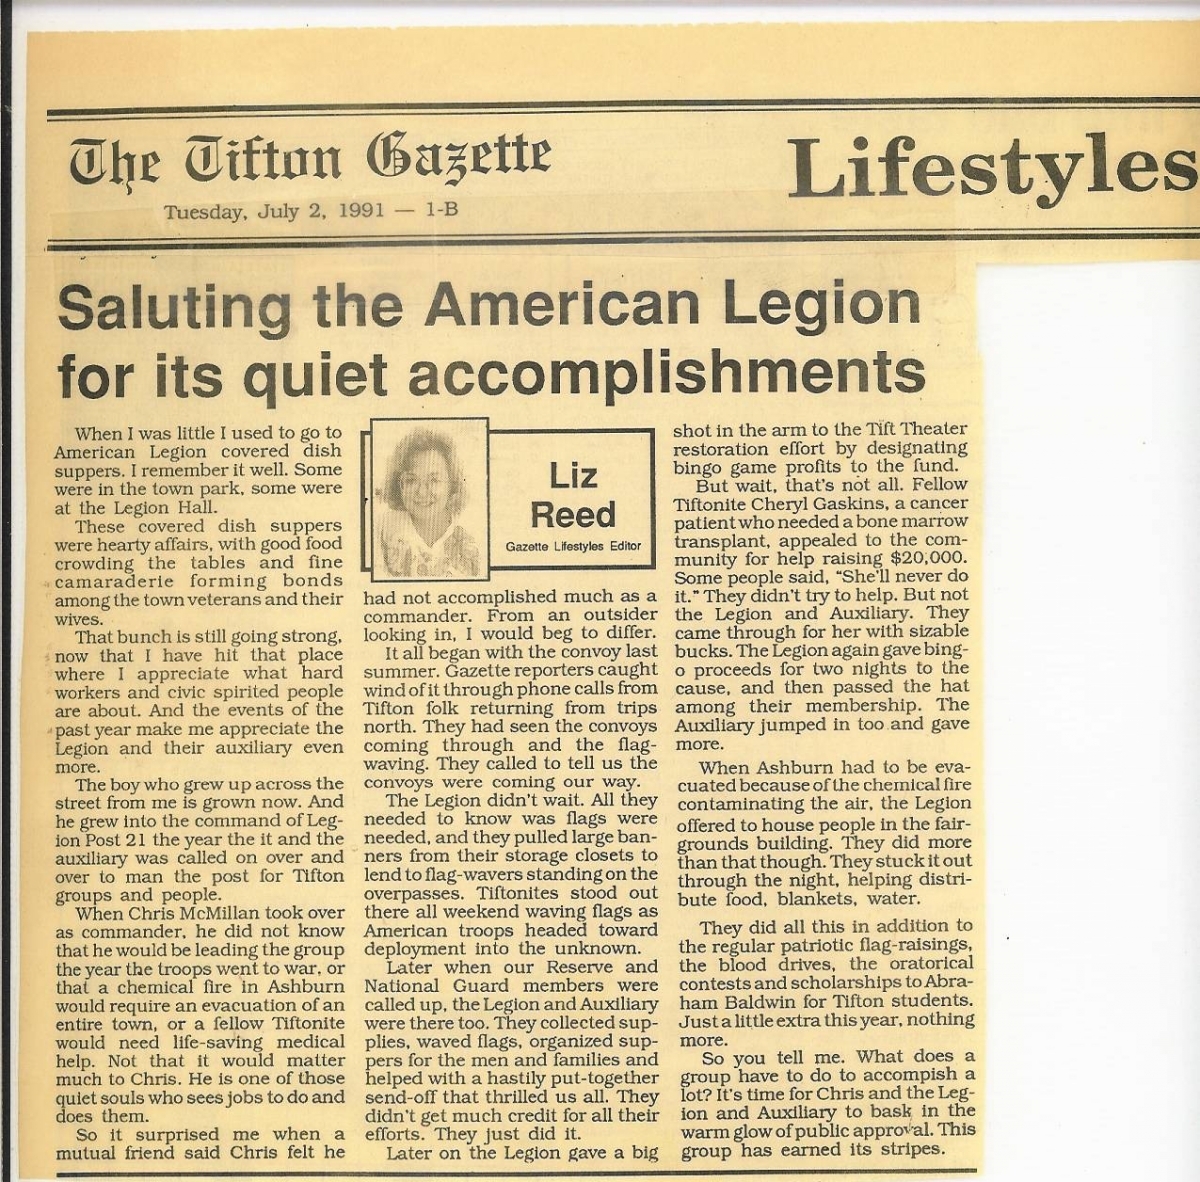 SALUTING THE AMERICAN LEGION NEWSPAPER CLIPPING